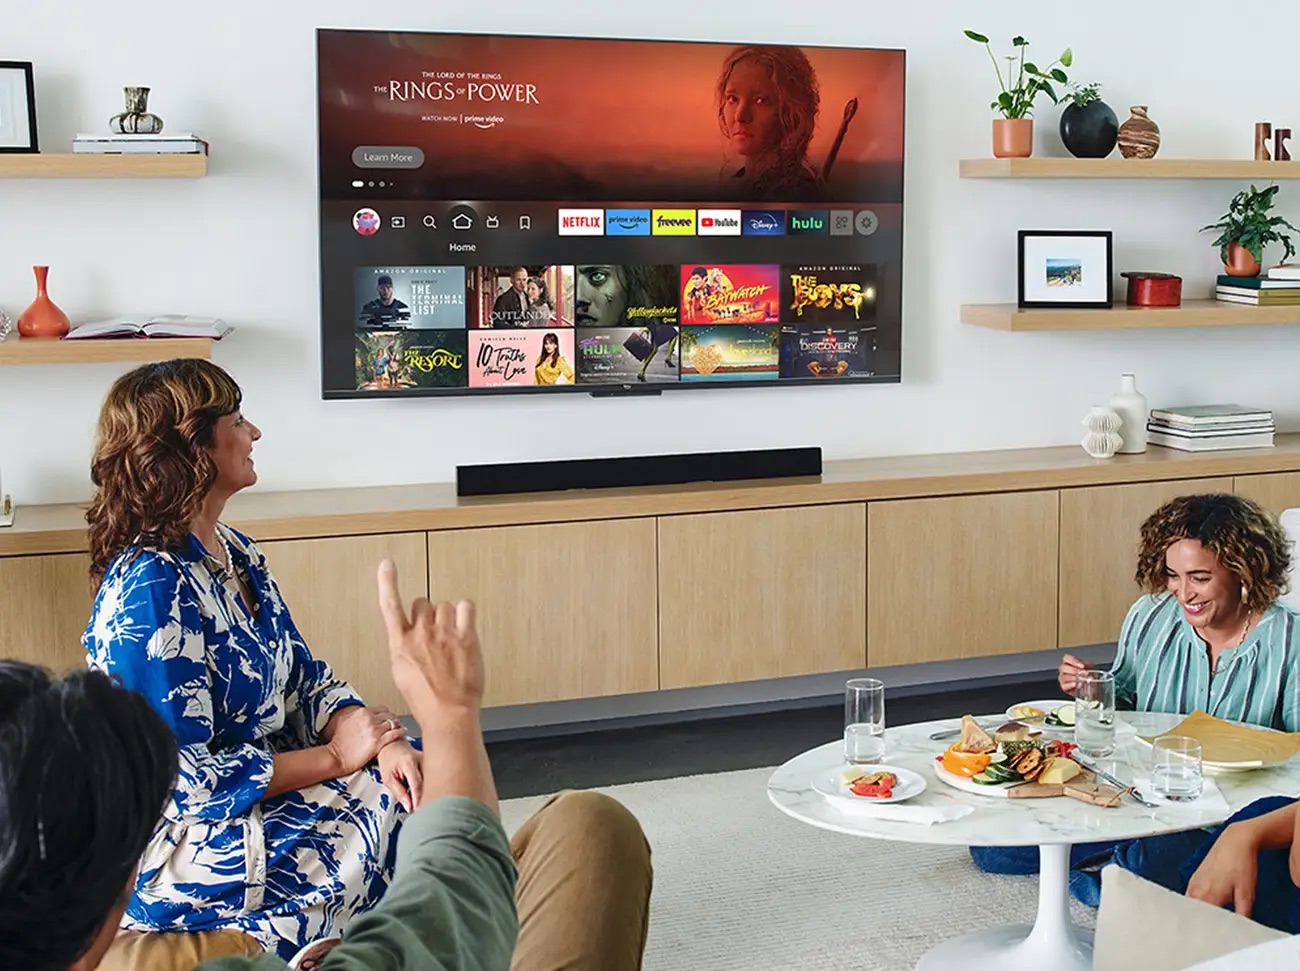 Amazon Fire TV Stick owners receive huge AI upgrade that makes searching for movies way easier and more conversational [Video]